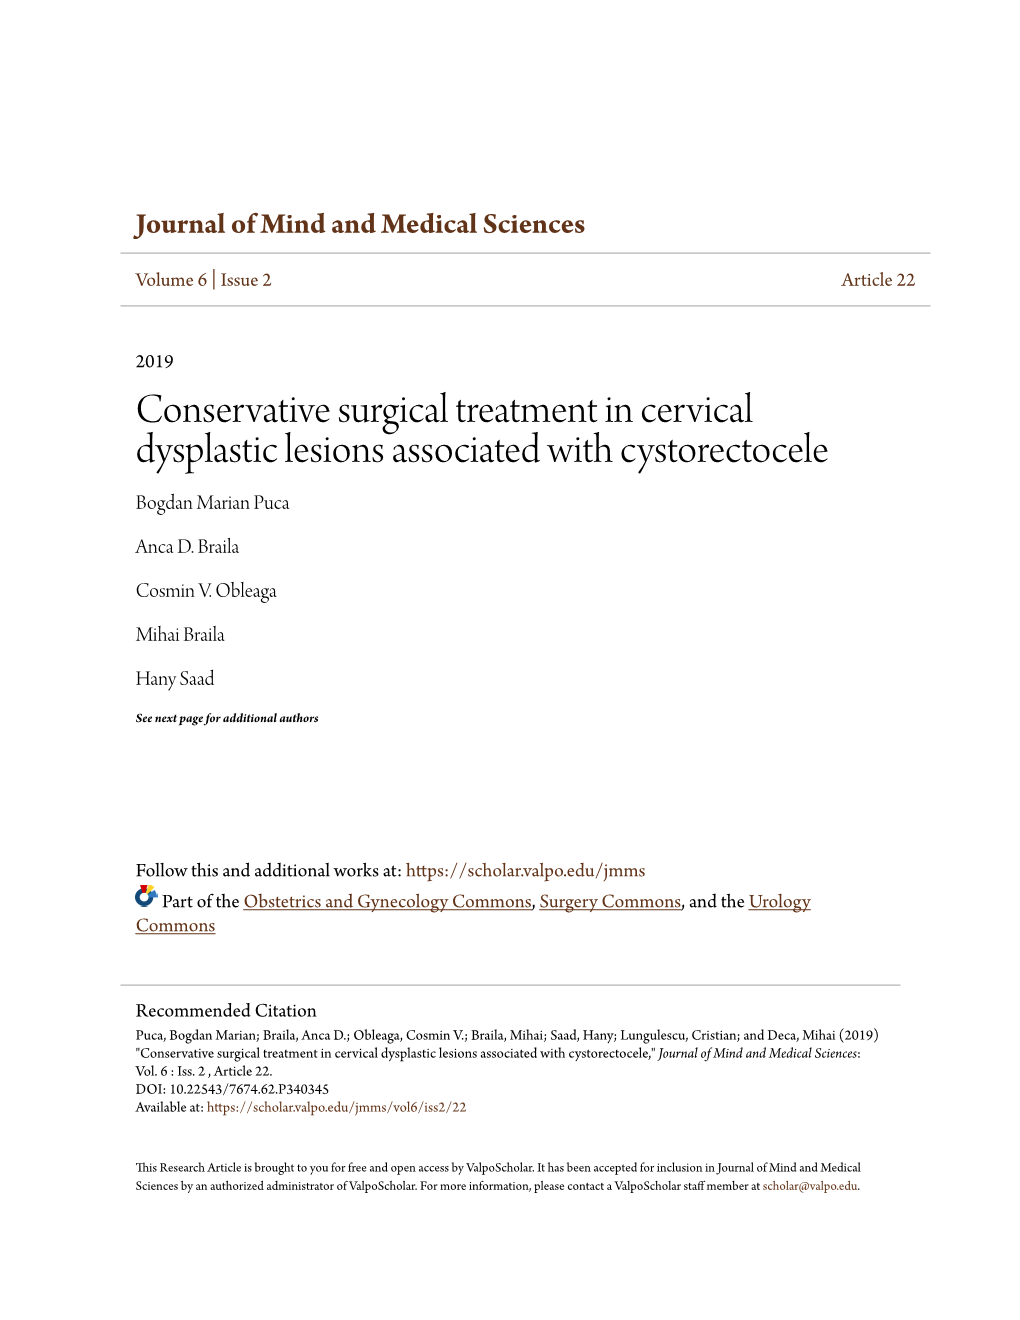 Conservative Surgical Treatment in Cervical Dysplastic Lesions Associated with Cystorectocele Bogdan Marian Puca